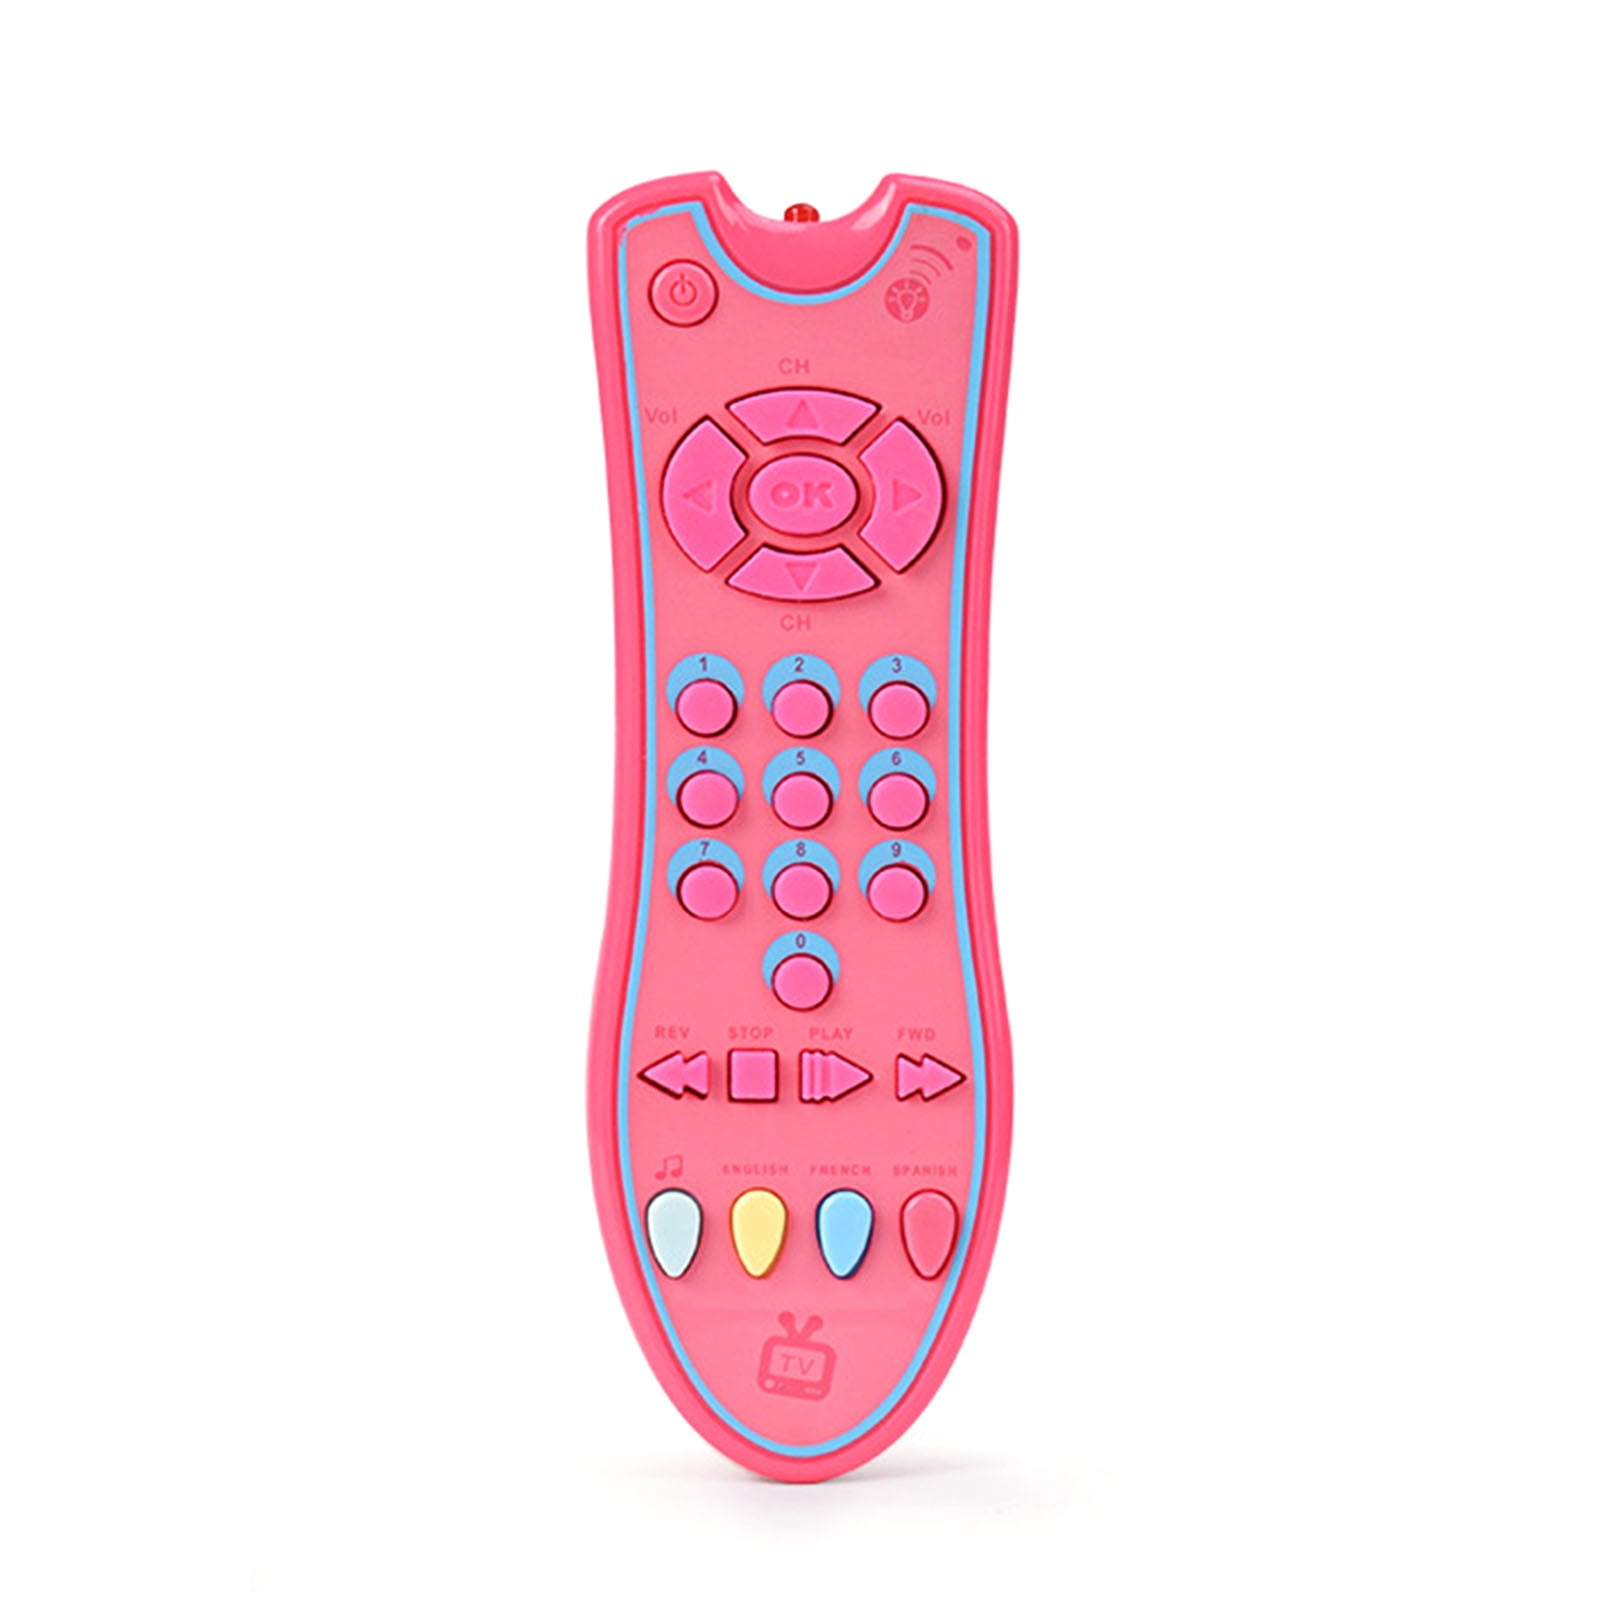 Musical TV Remote Control with and Sound Early Education 3 language ...